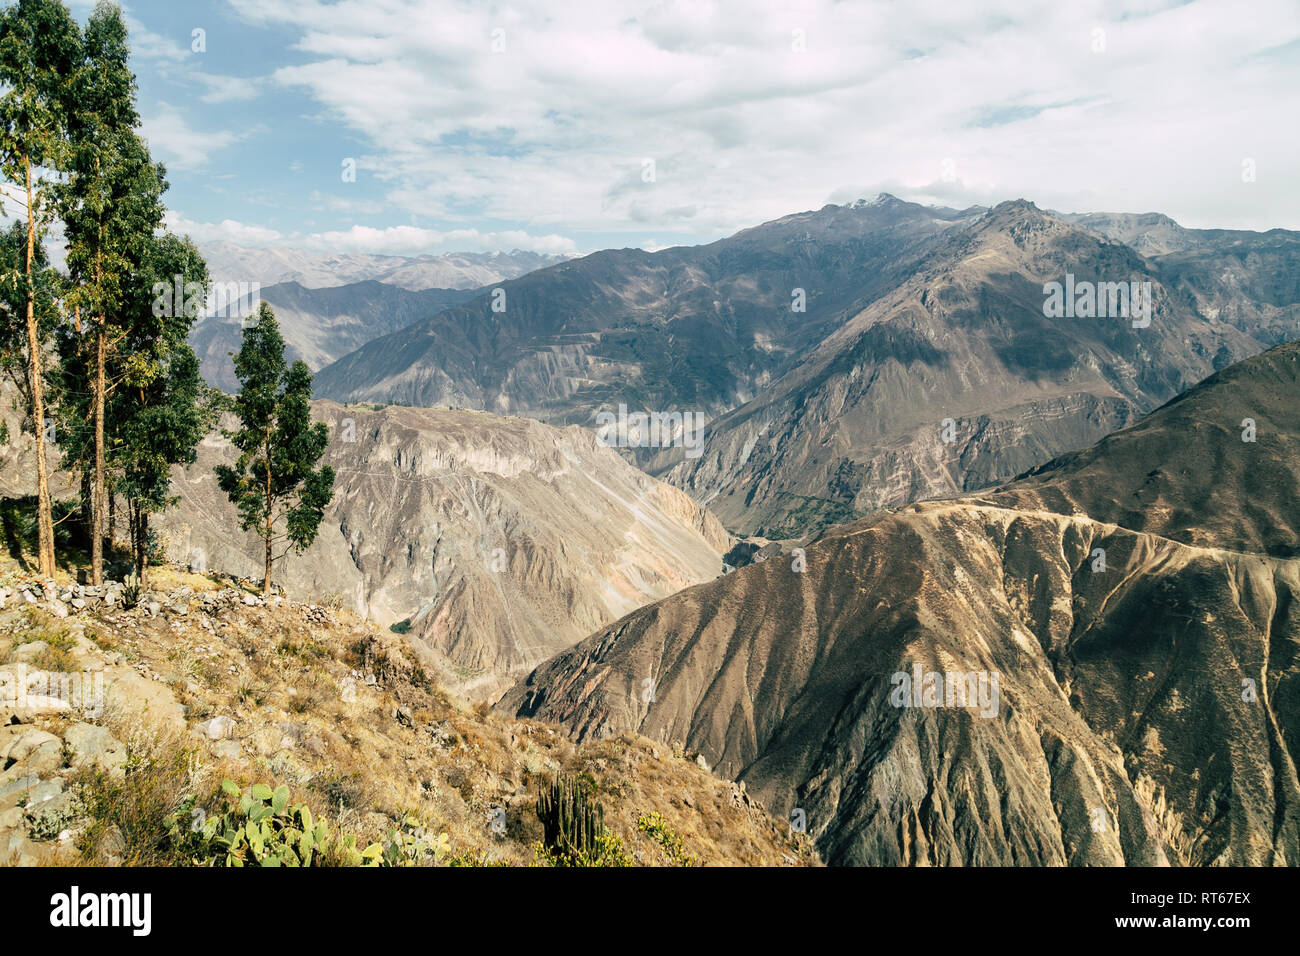 Colca Canyon, one of the world's deepest canyons, located in southern Peru. Stock Photo